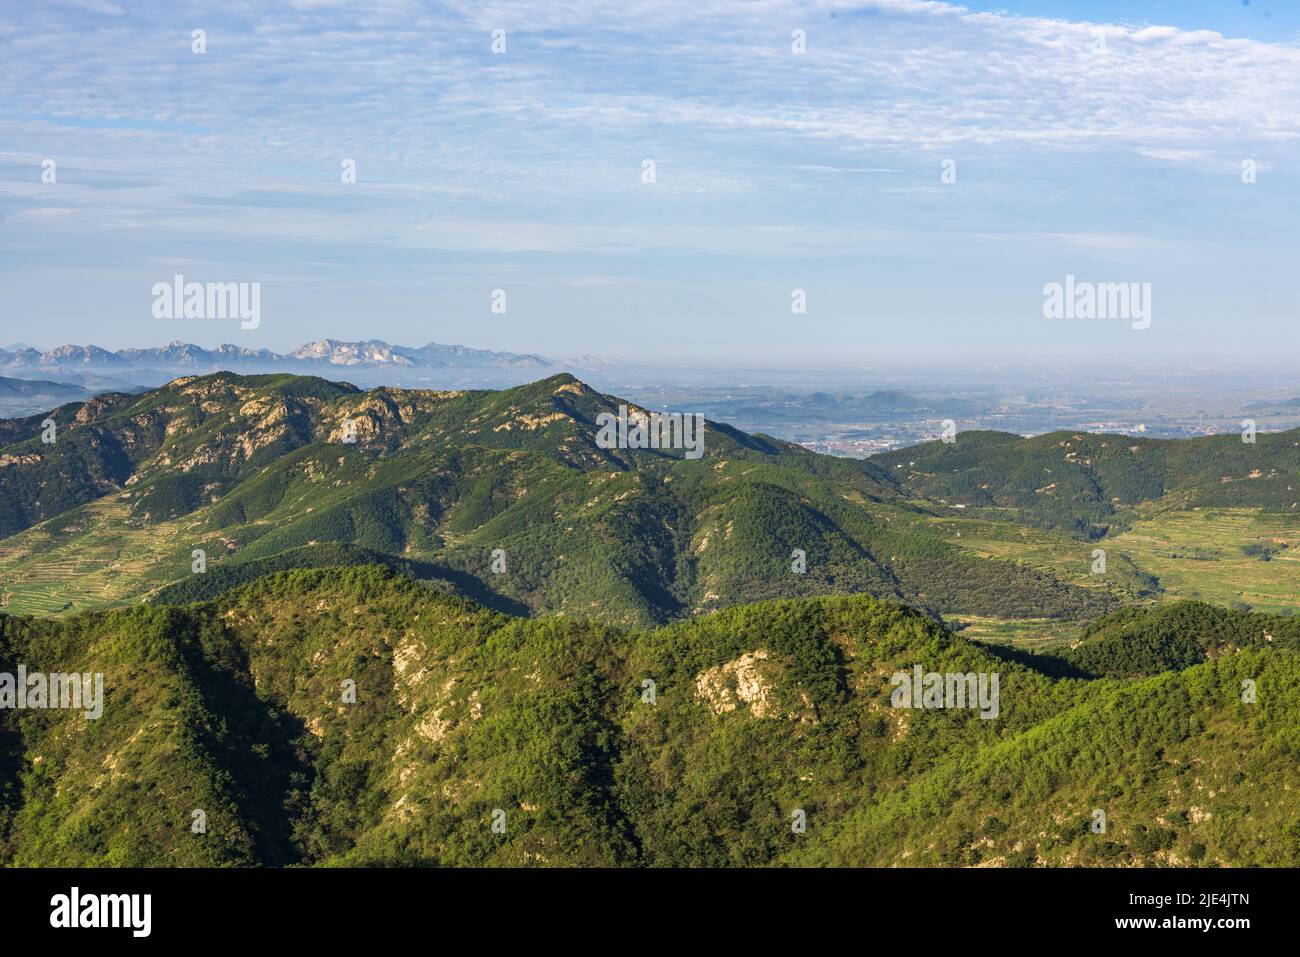 Surrounded by mountains forests hills mountains Stock Photo